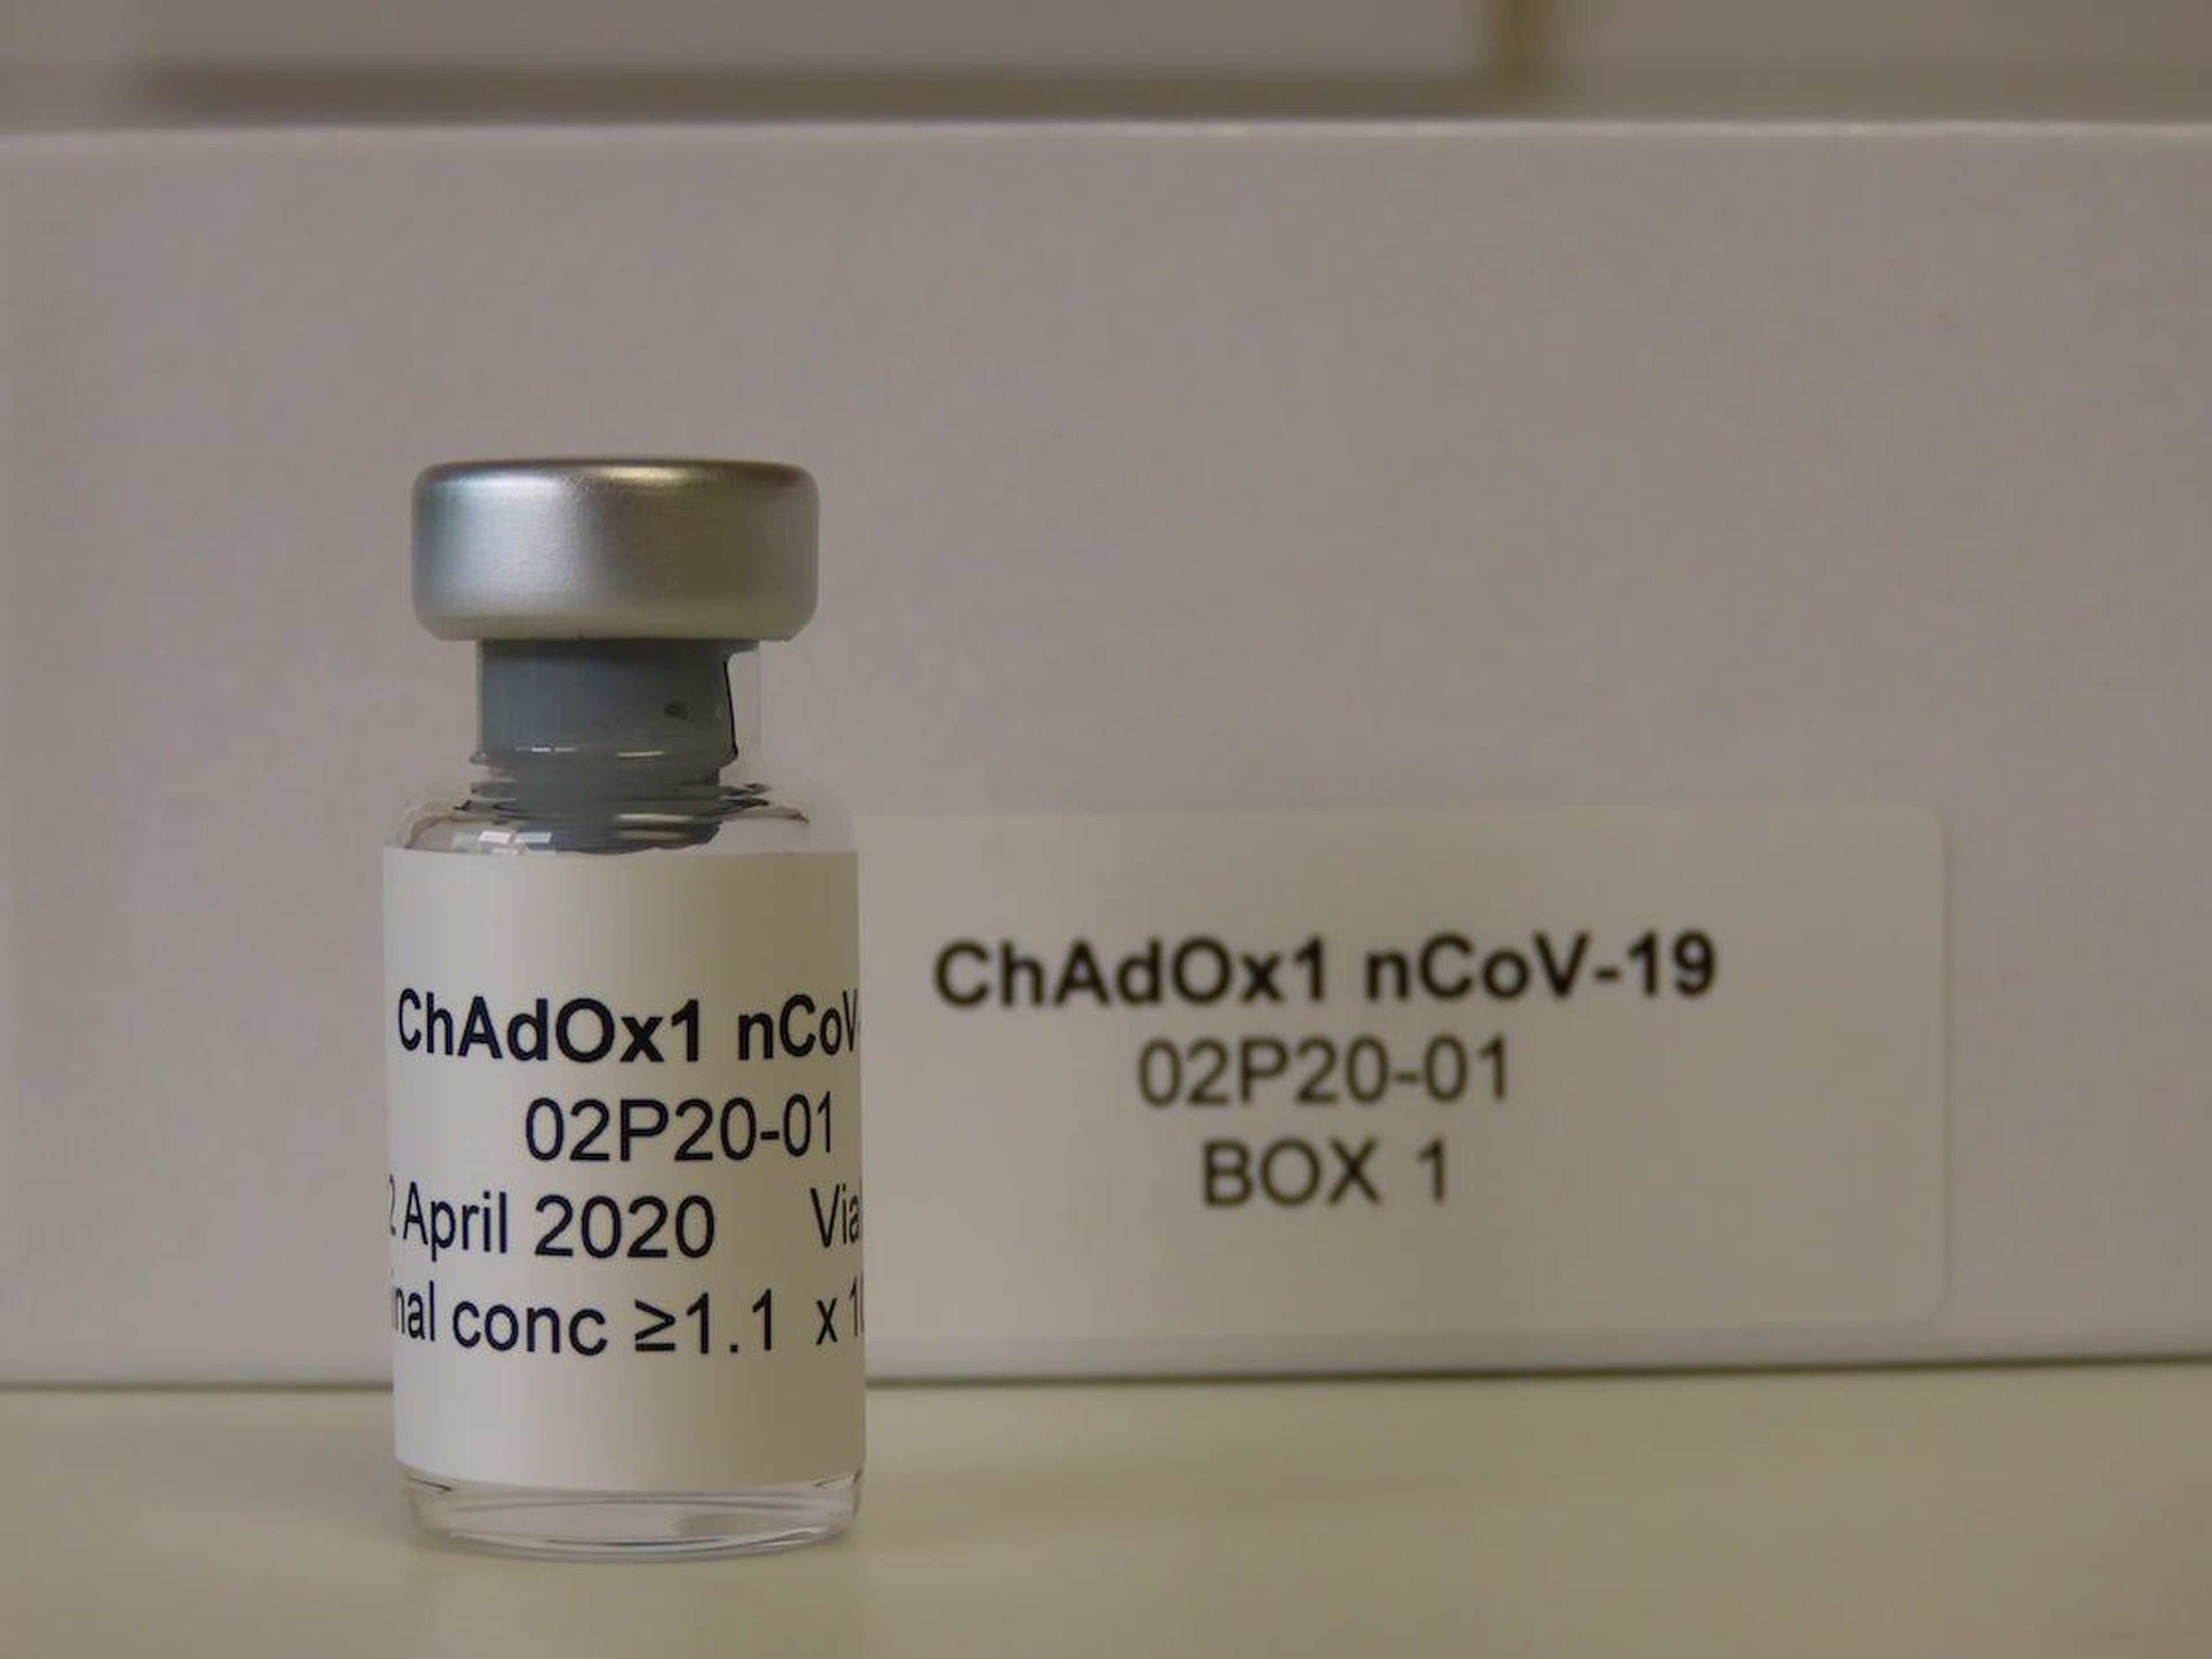 Vial 1 of Box 1 of the Oxford Vaccine Group's vaccine candidate, to be used in Phase 1 clinical trial, seen at the Clinical Biomanufacturing Facility in Oxford, England, on April 2, 2020.